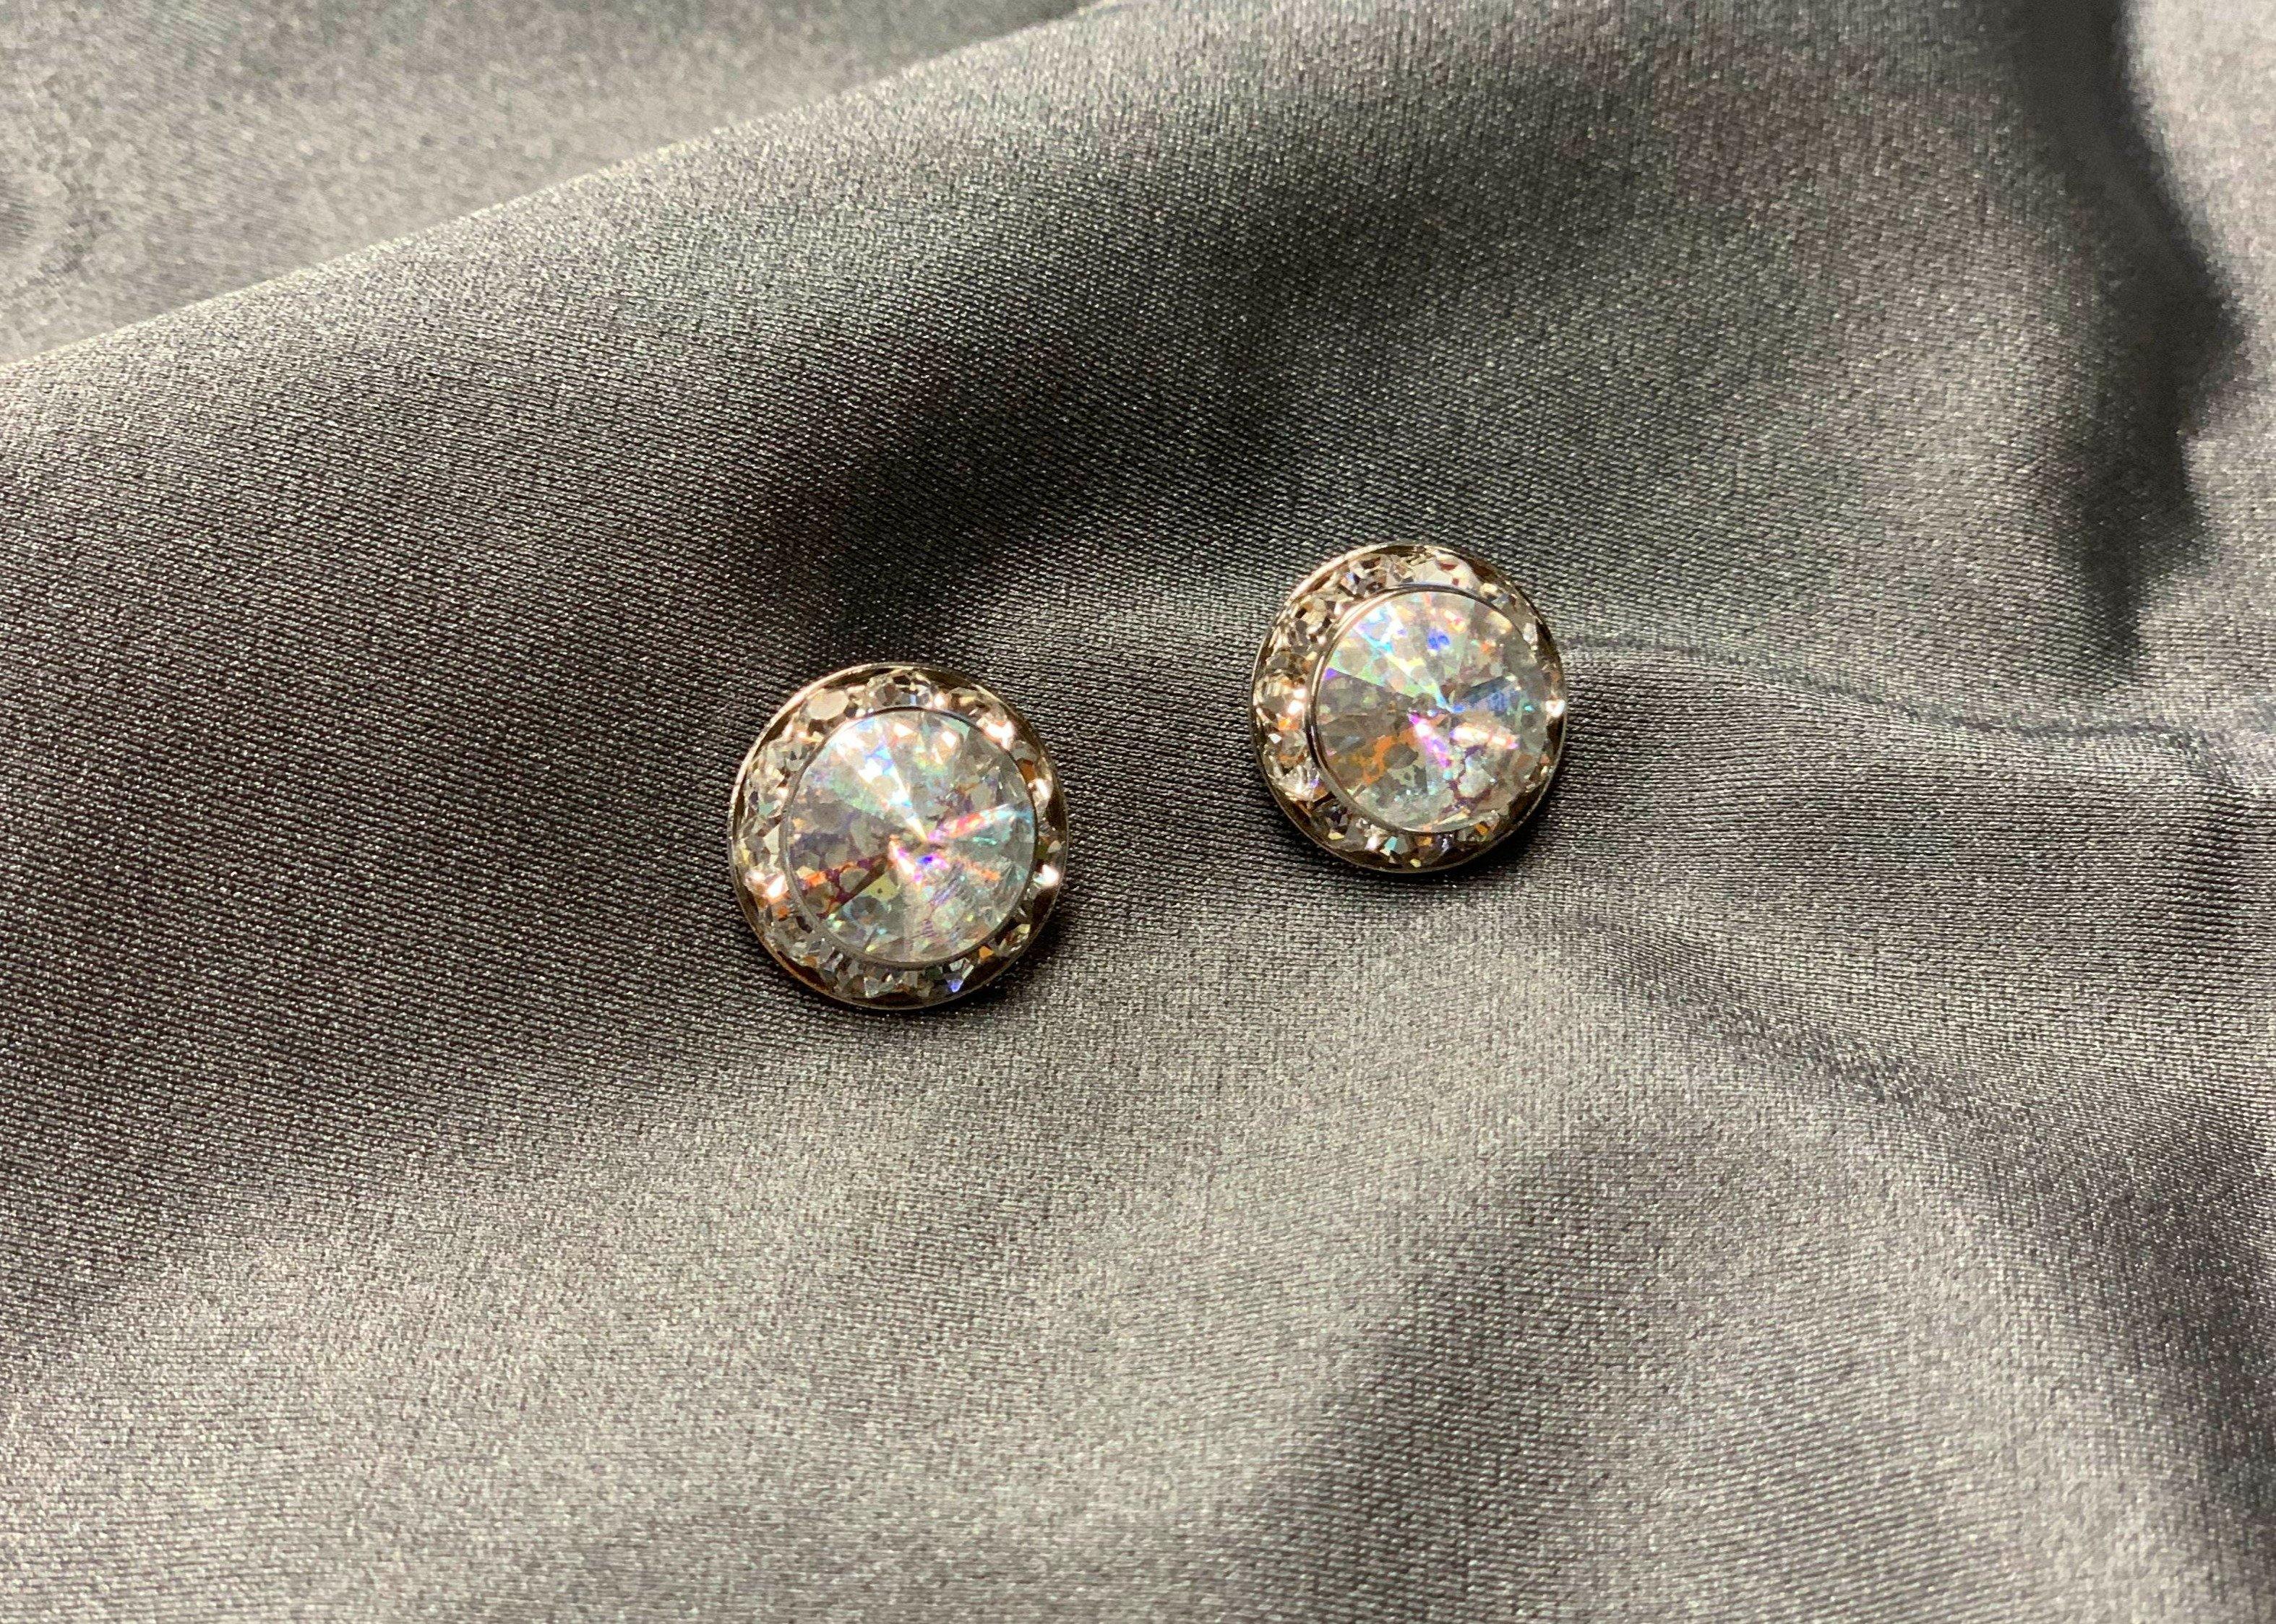 15mm Performance Earring - The Rhinestone Place